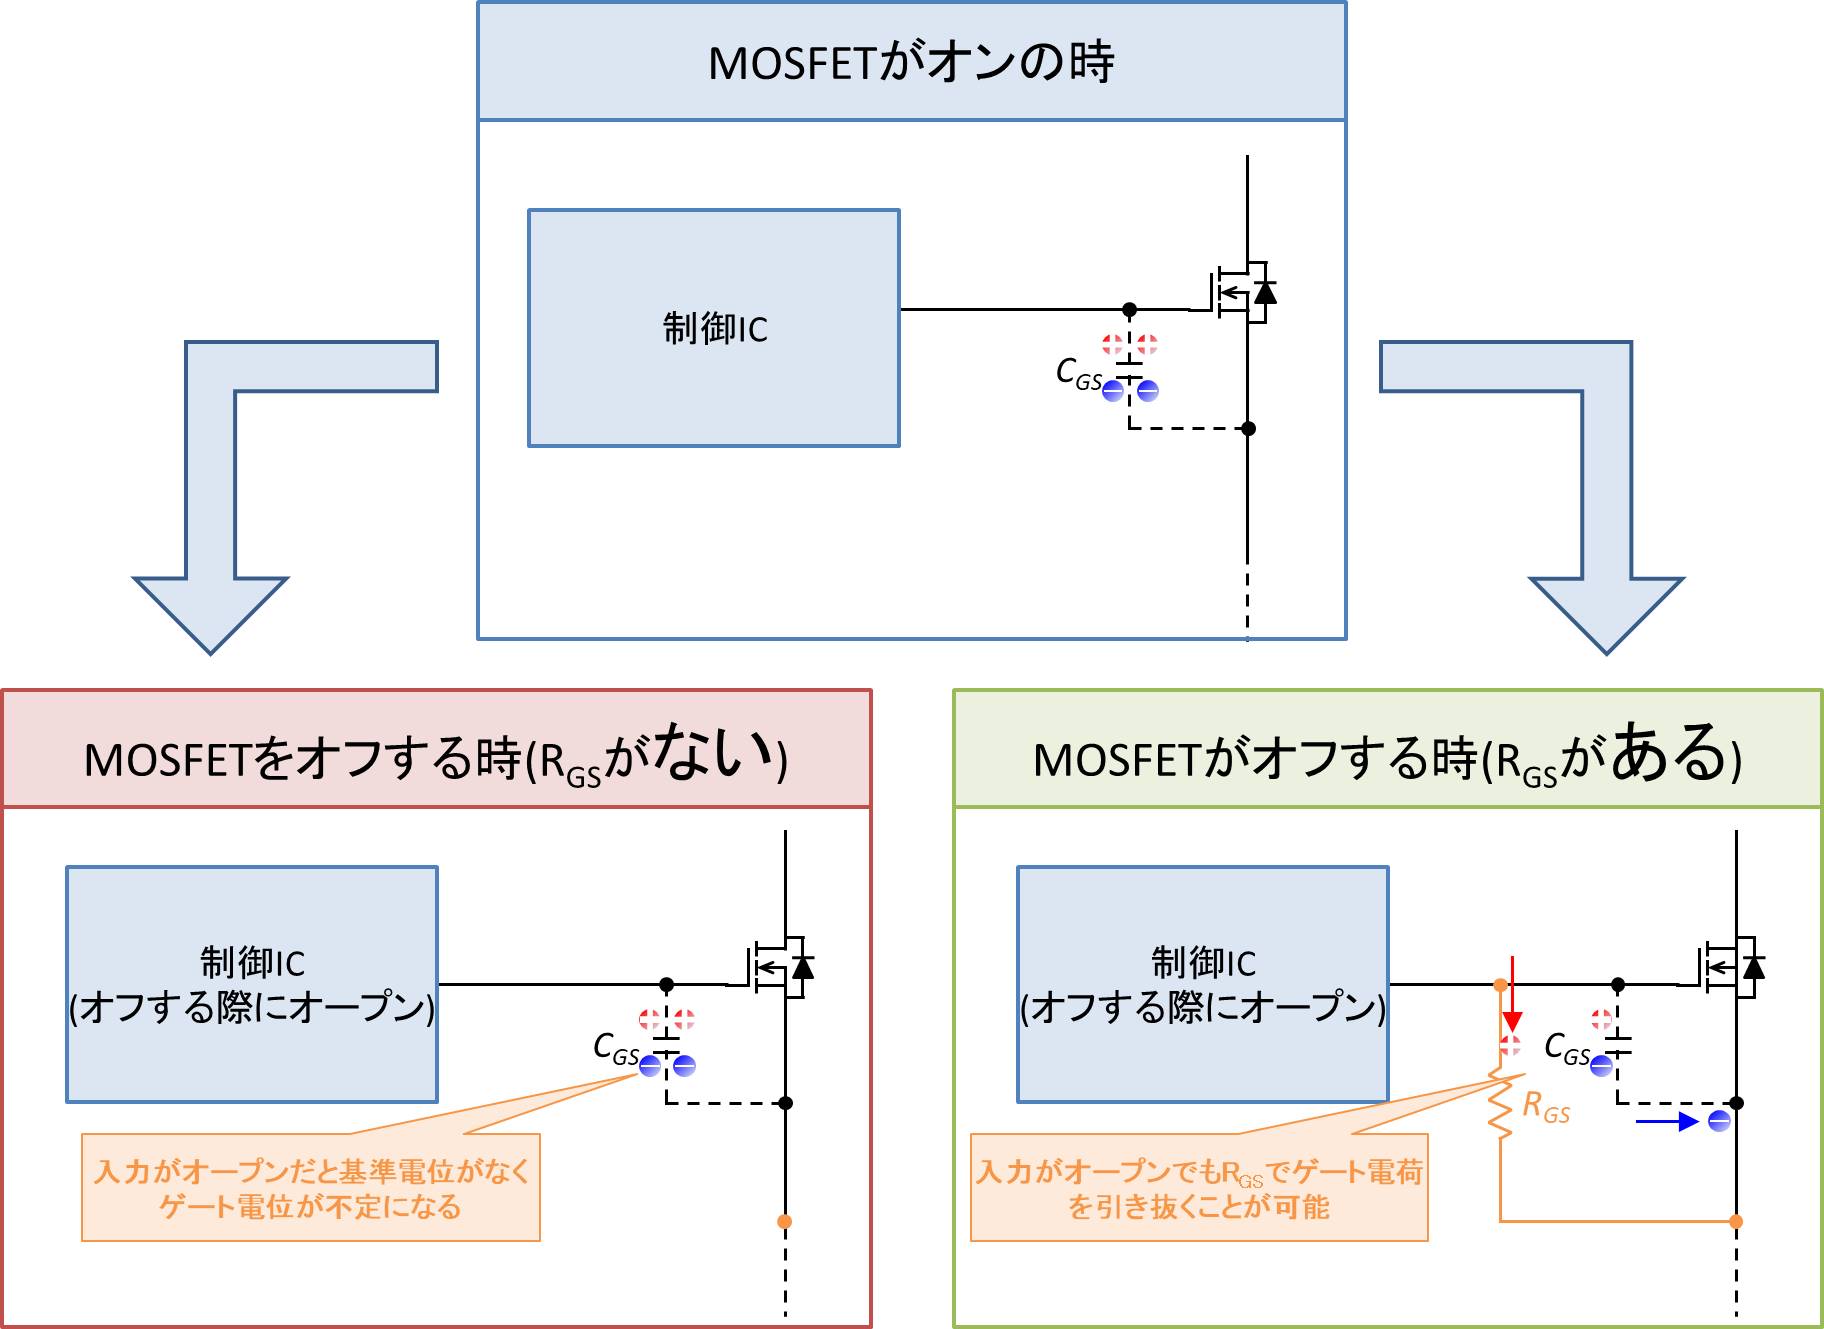 MOSFETにゲートソース間抵抗を接続する理由１